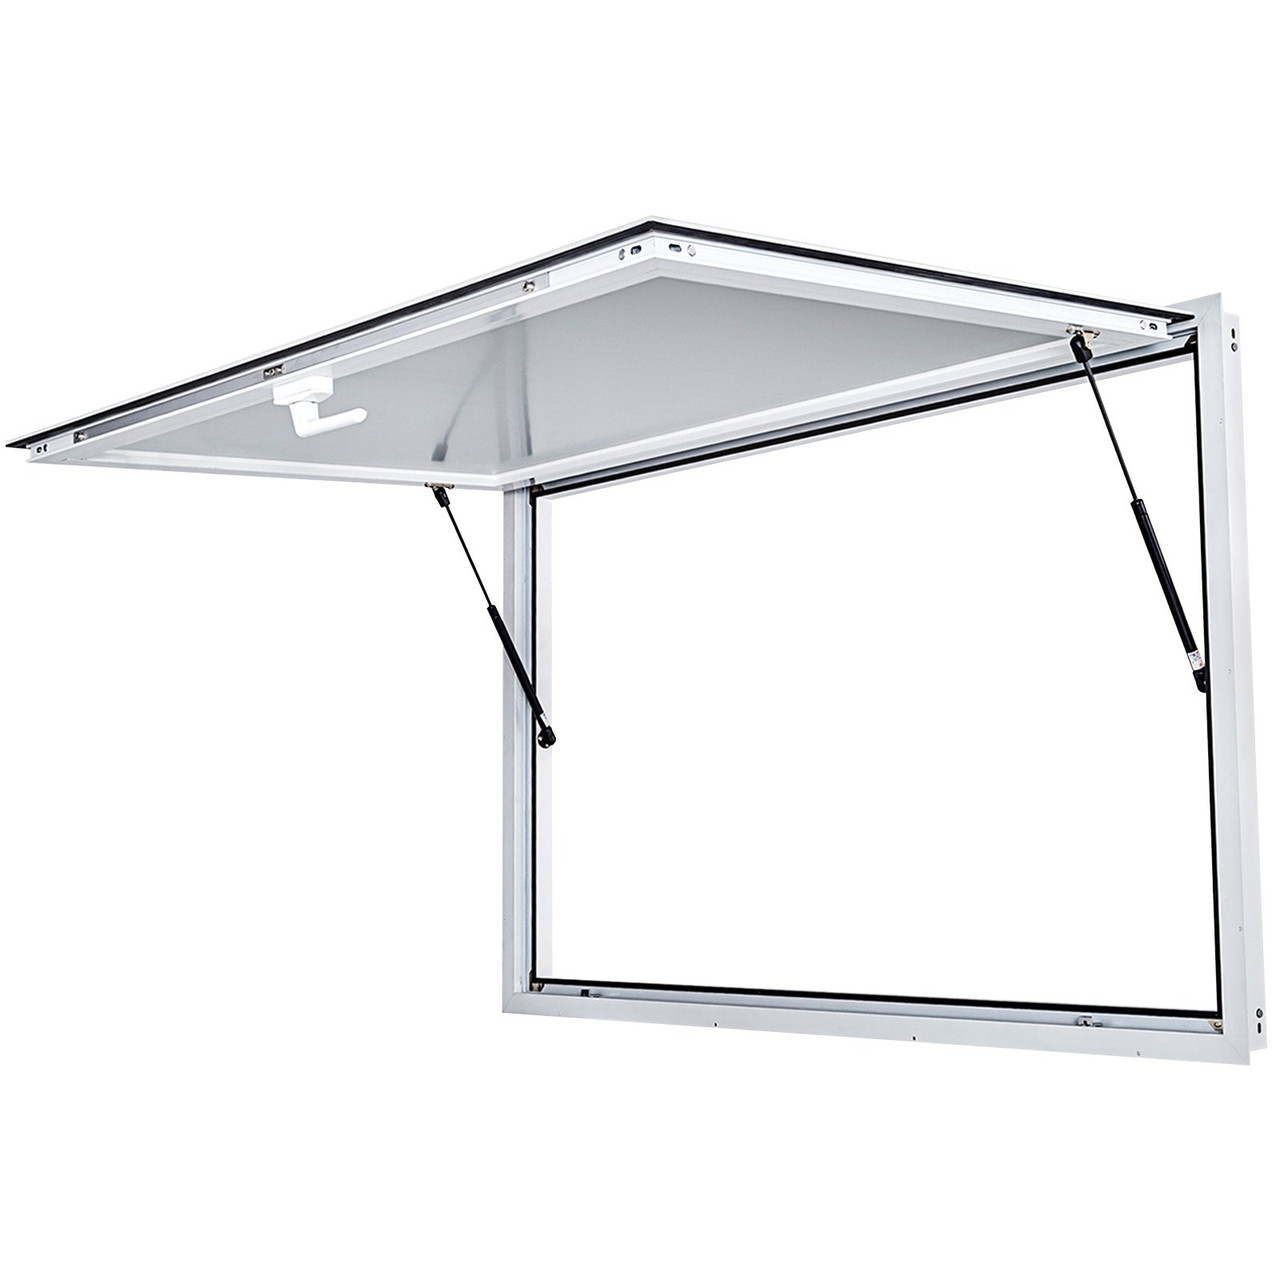 Concession Window 64 x 40 Inch, Concession Stand Serving Window Door with Double-Point Fork Lock, Concession Awning Door Up to 85 degrees for Food Trucks, Glass Not Included